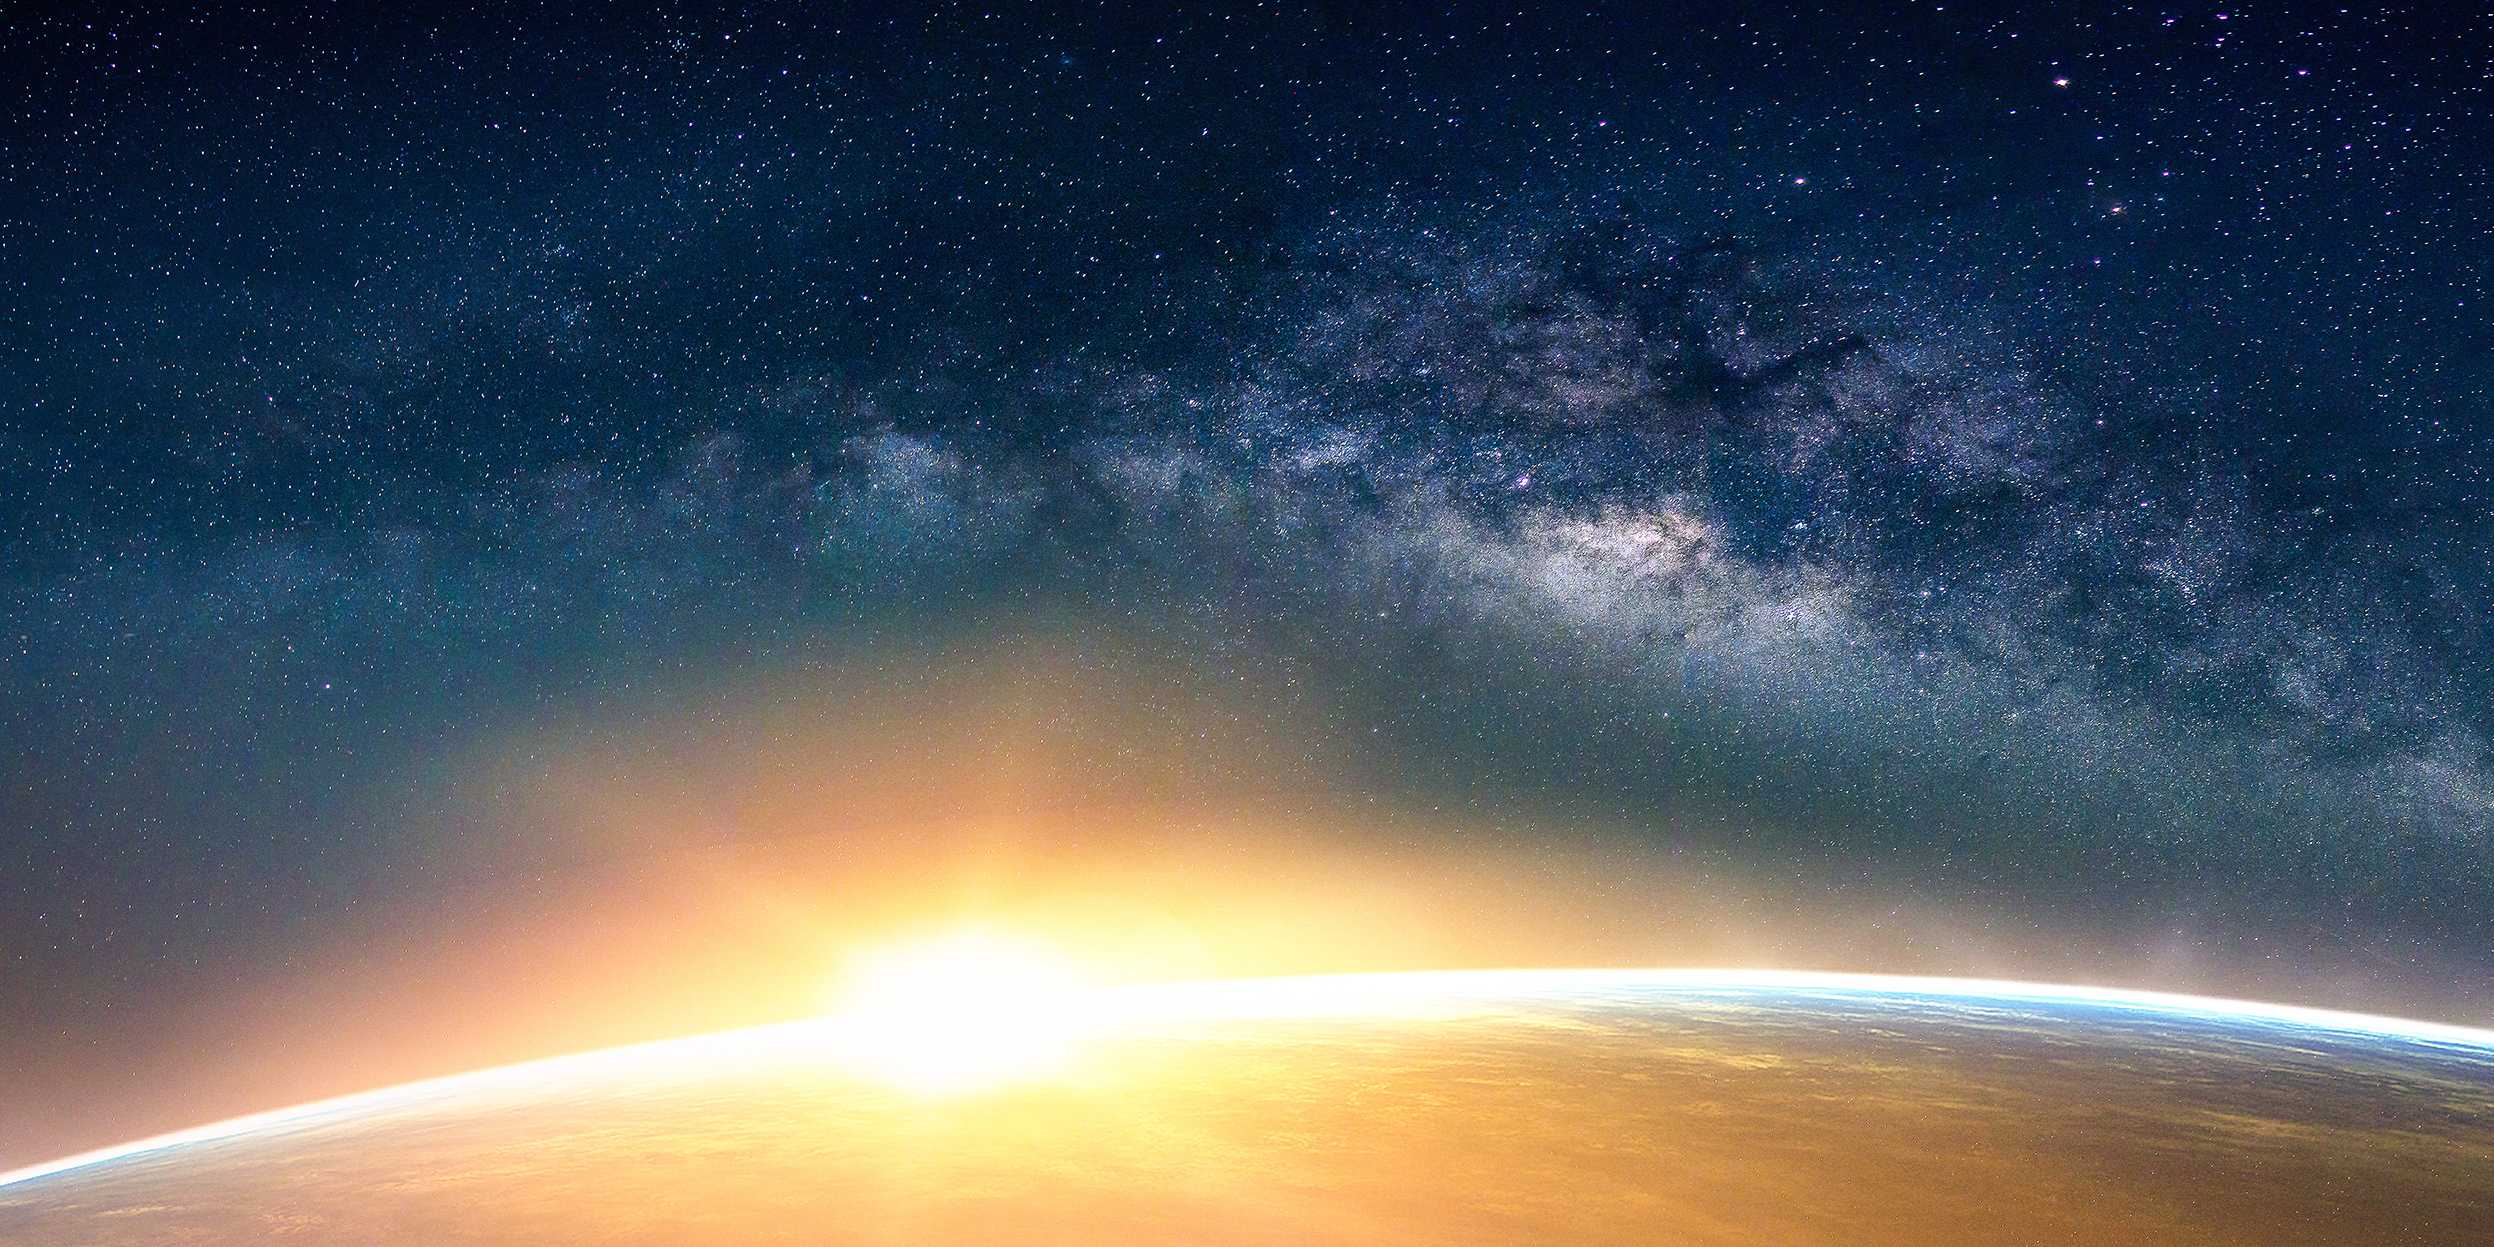 Sunrise on Earth, as seen from space